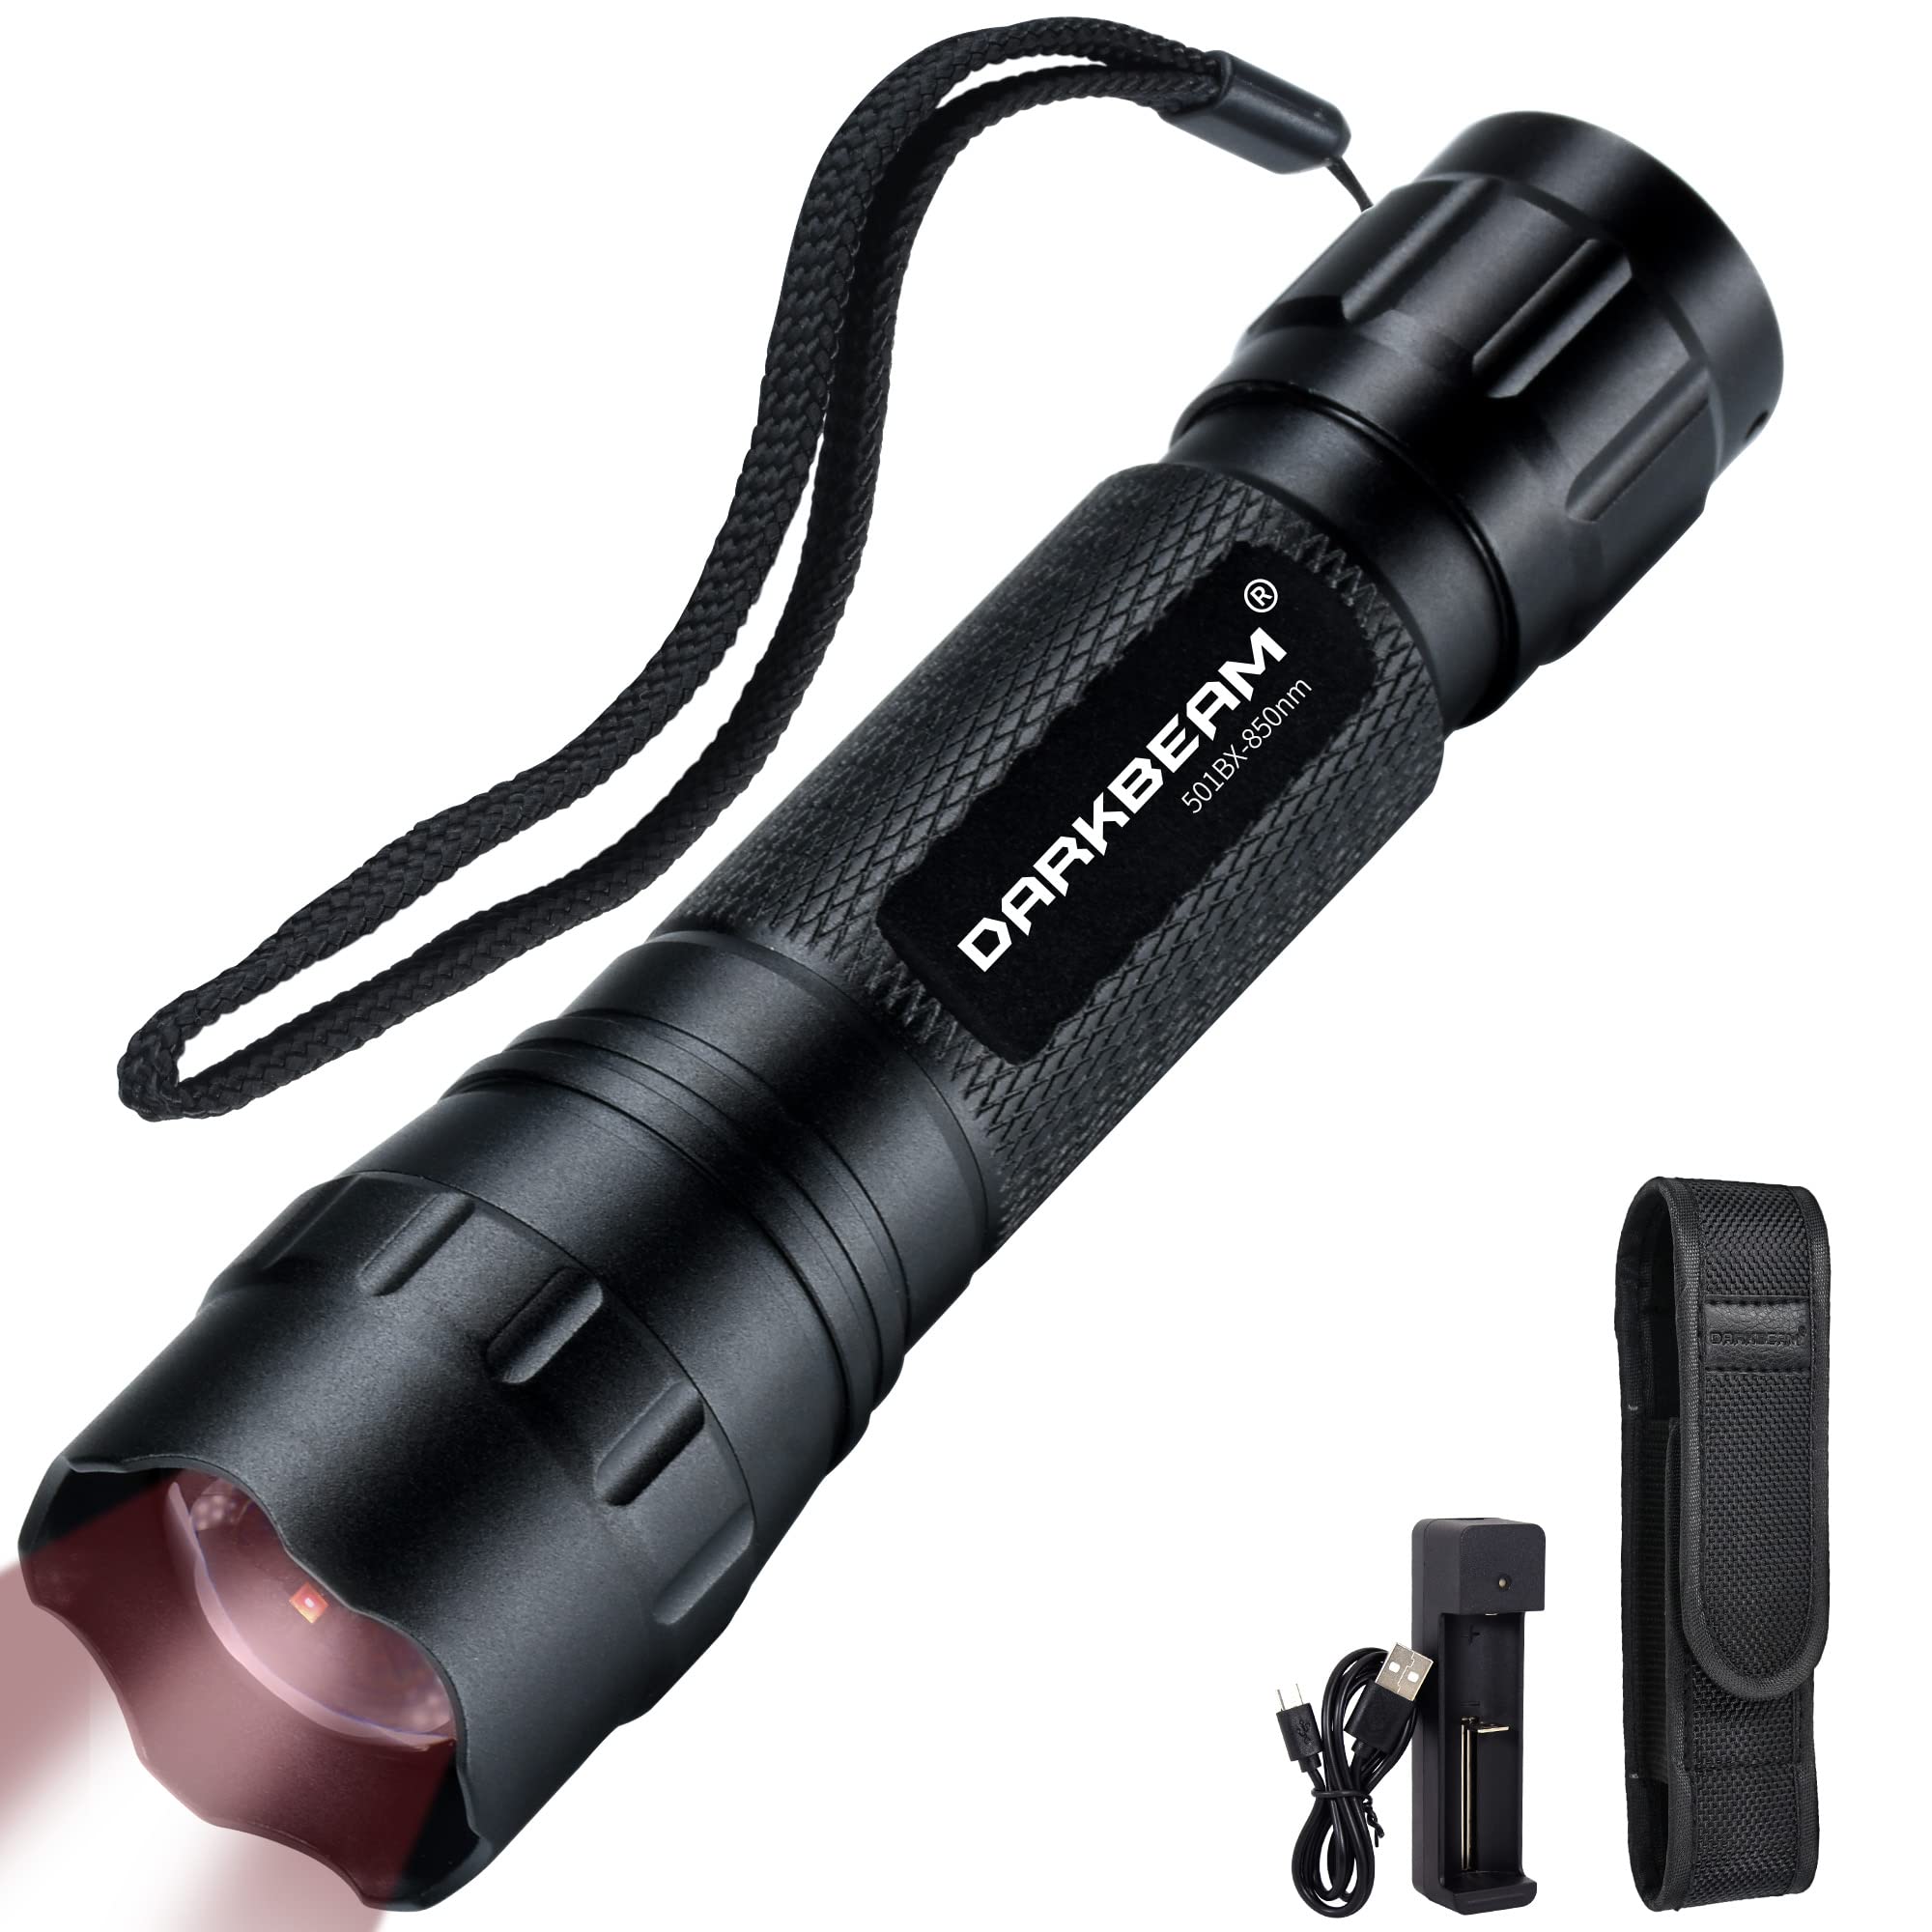 DARKBEAM Infrared 850nm Light for Night Vision Scope, LED Long Range & Mini  IR Flashlight Must Work with Infrared Gear, Rechargeable Portable Zoom  Tactical Illuminator for Hunting, Observation, Search